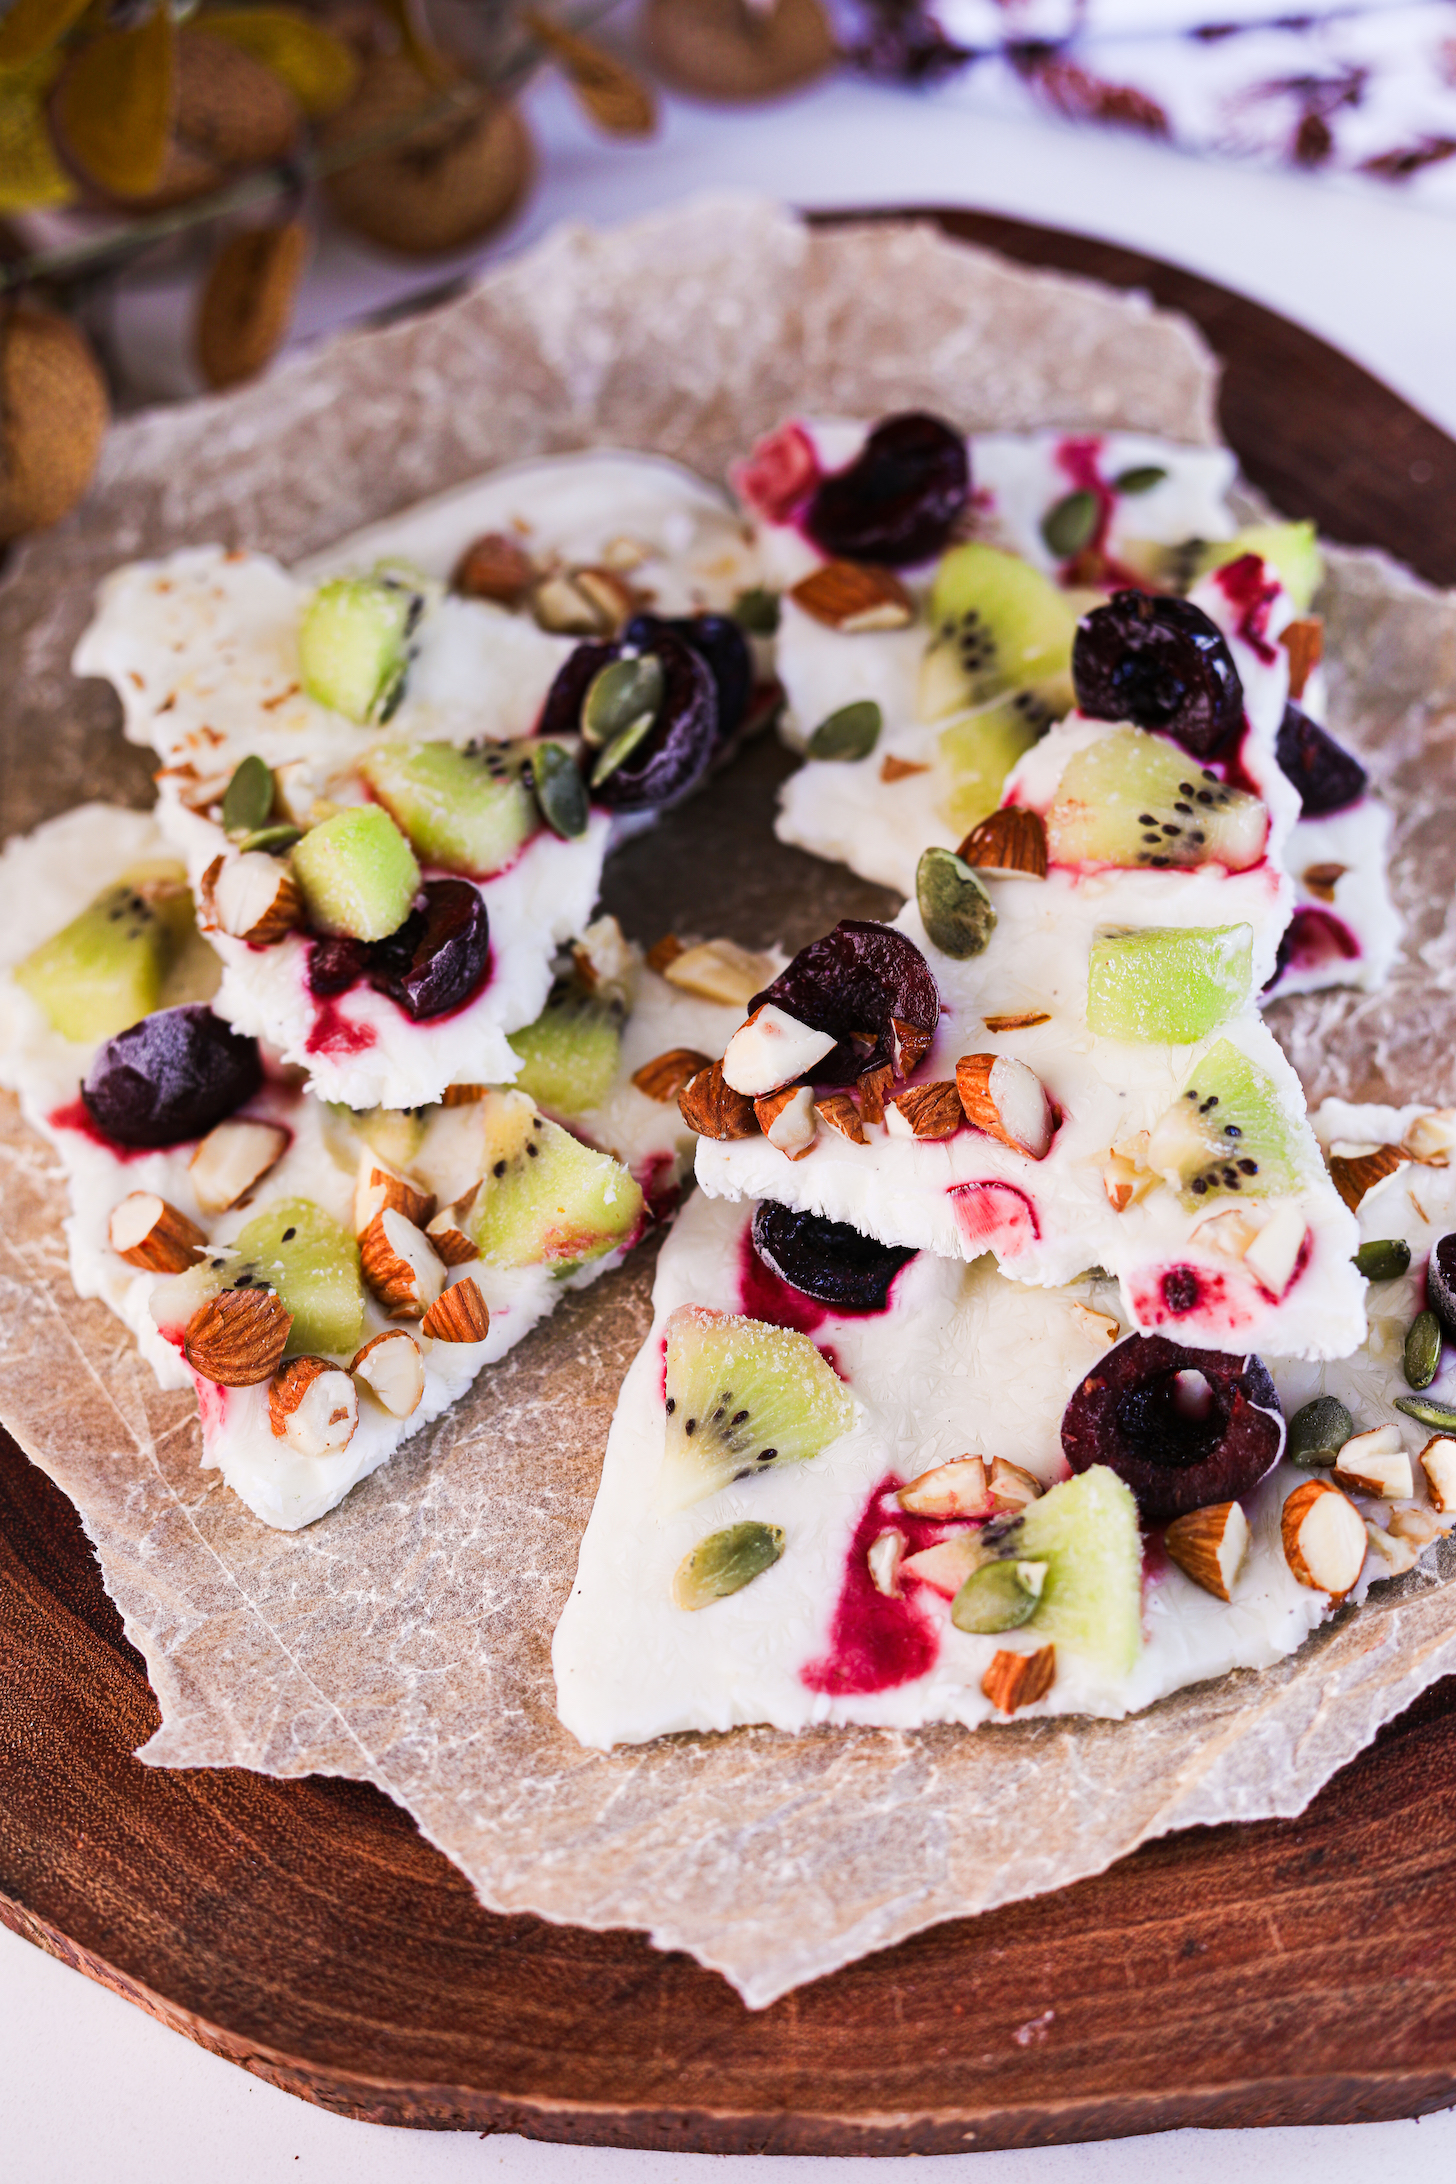 Perspective image featuring stacked frozen yogurt bark pieces, topped with fruits and nuts styled on a wooden serving board.